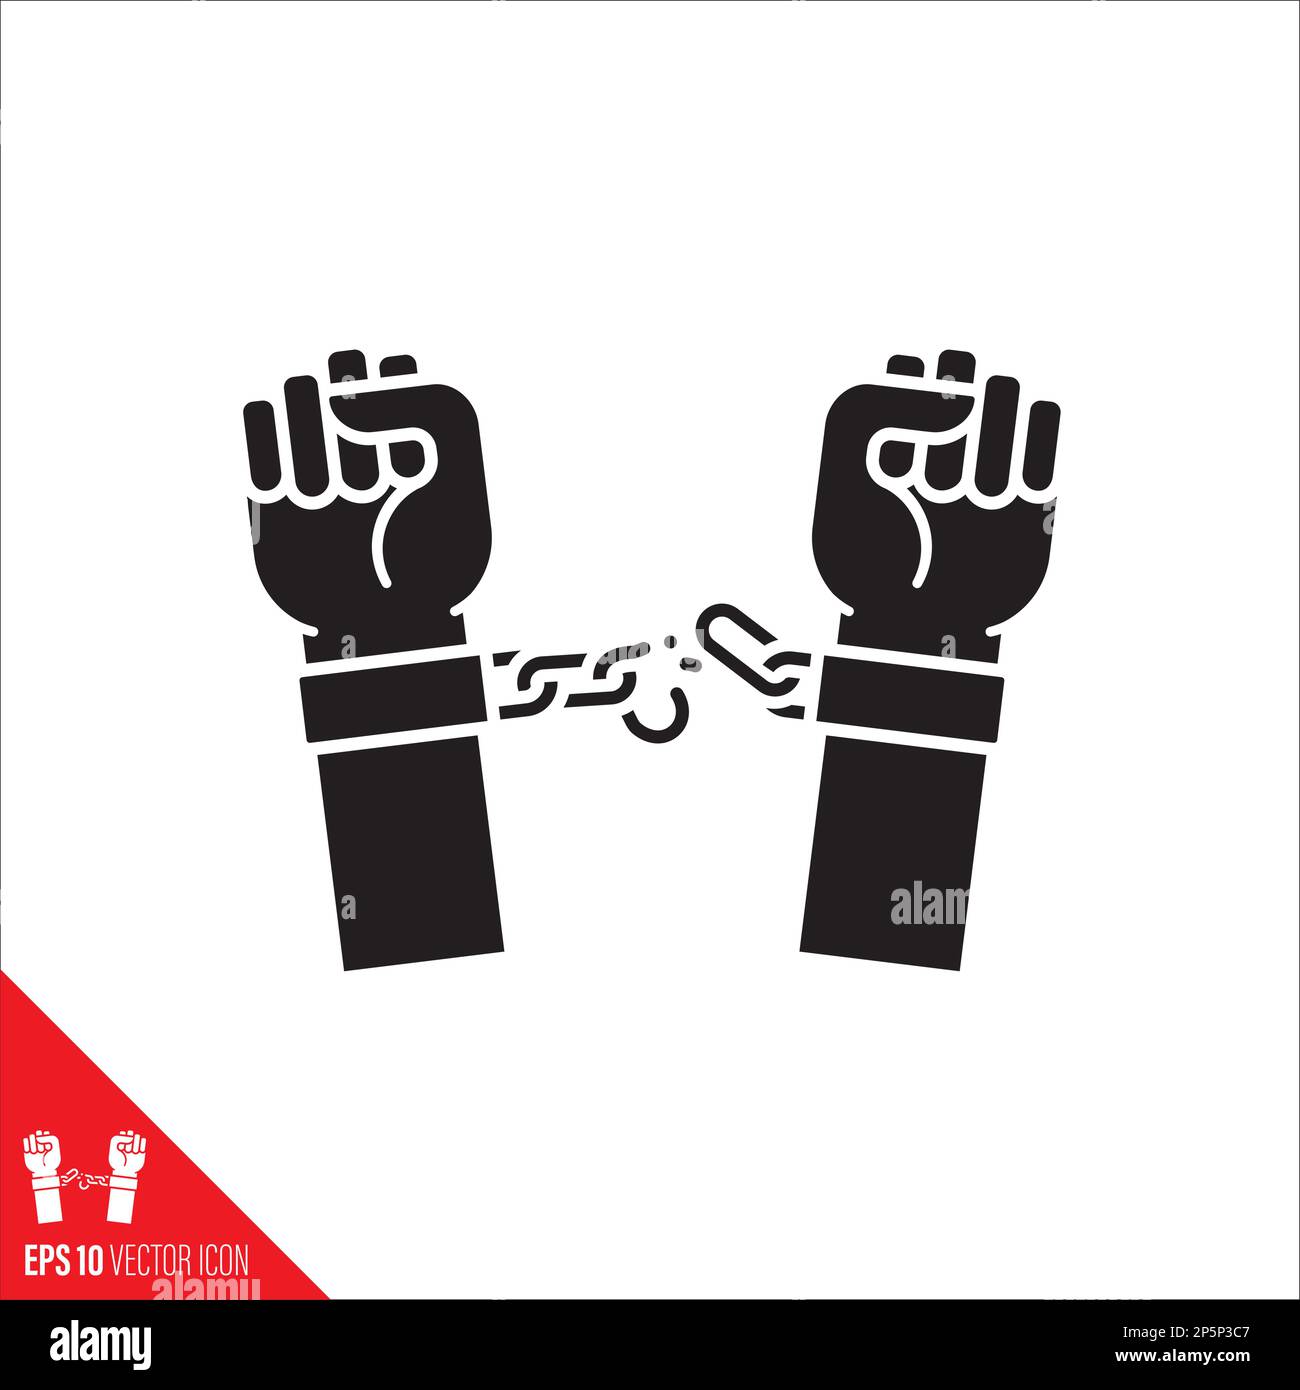 Hands freeing themselves from shackles vector glyph icon. Abolition of Slavery concept. Stock Vector